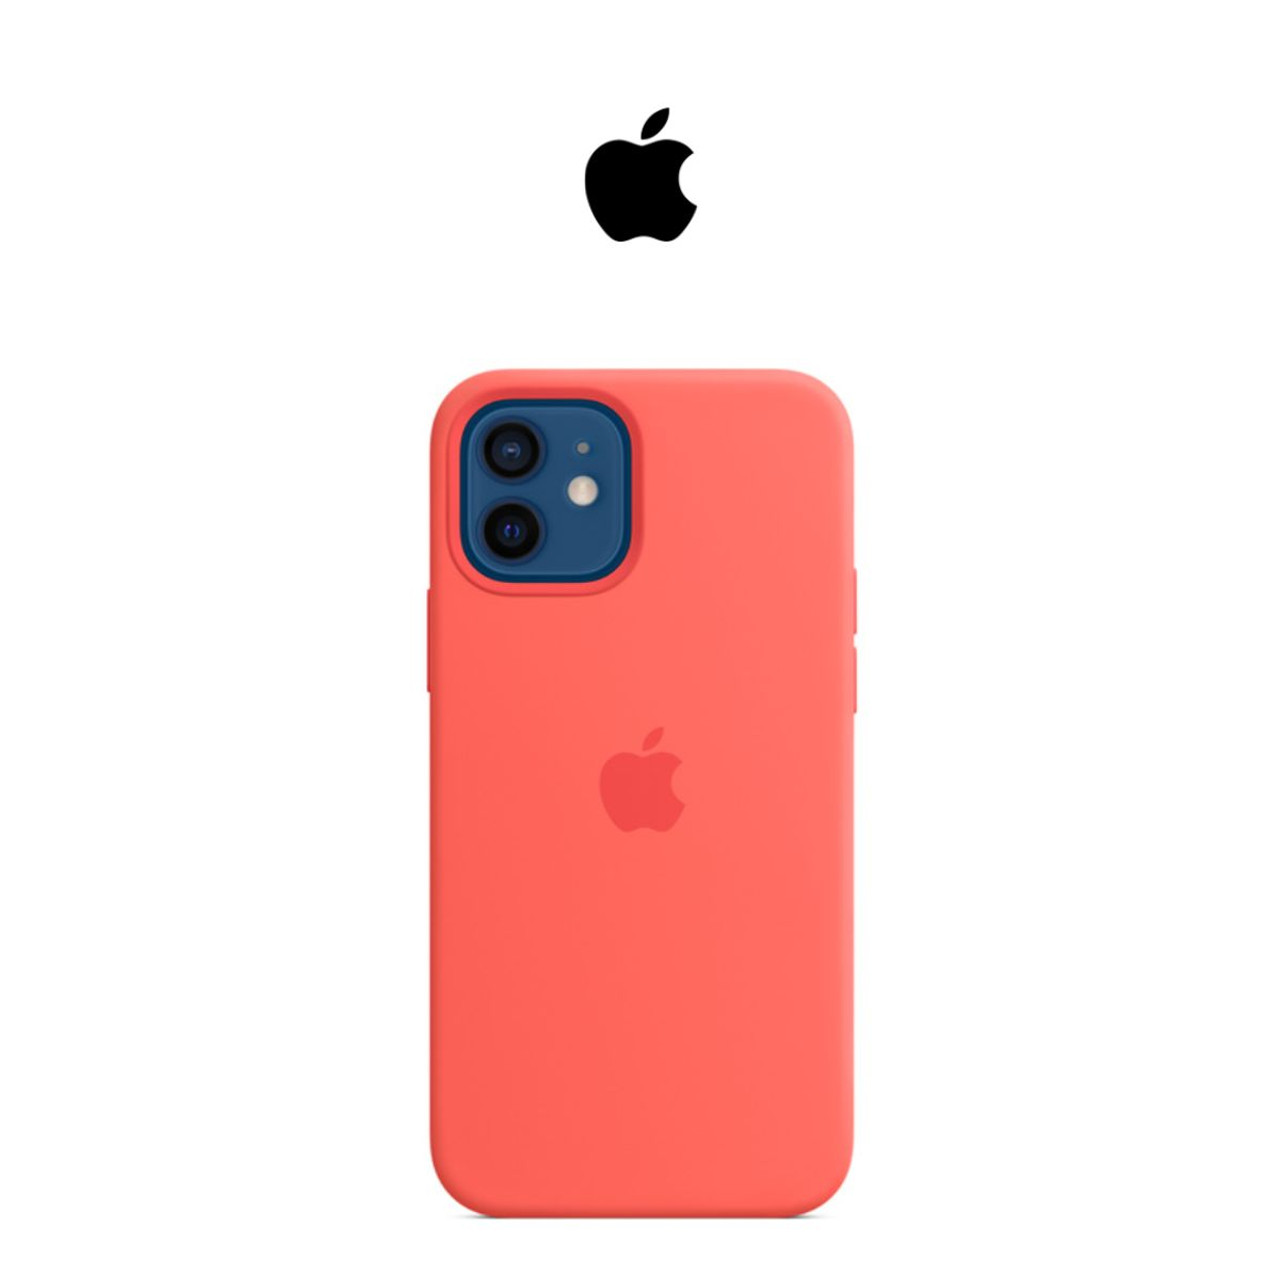 Apple iPhone 12 Pro Max Silicone Case product image